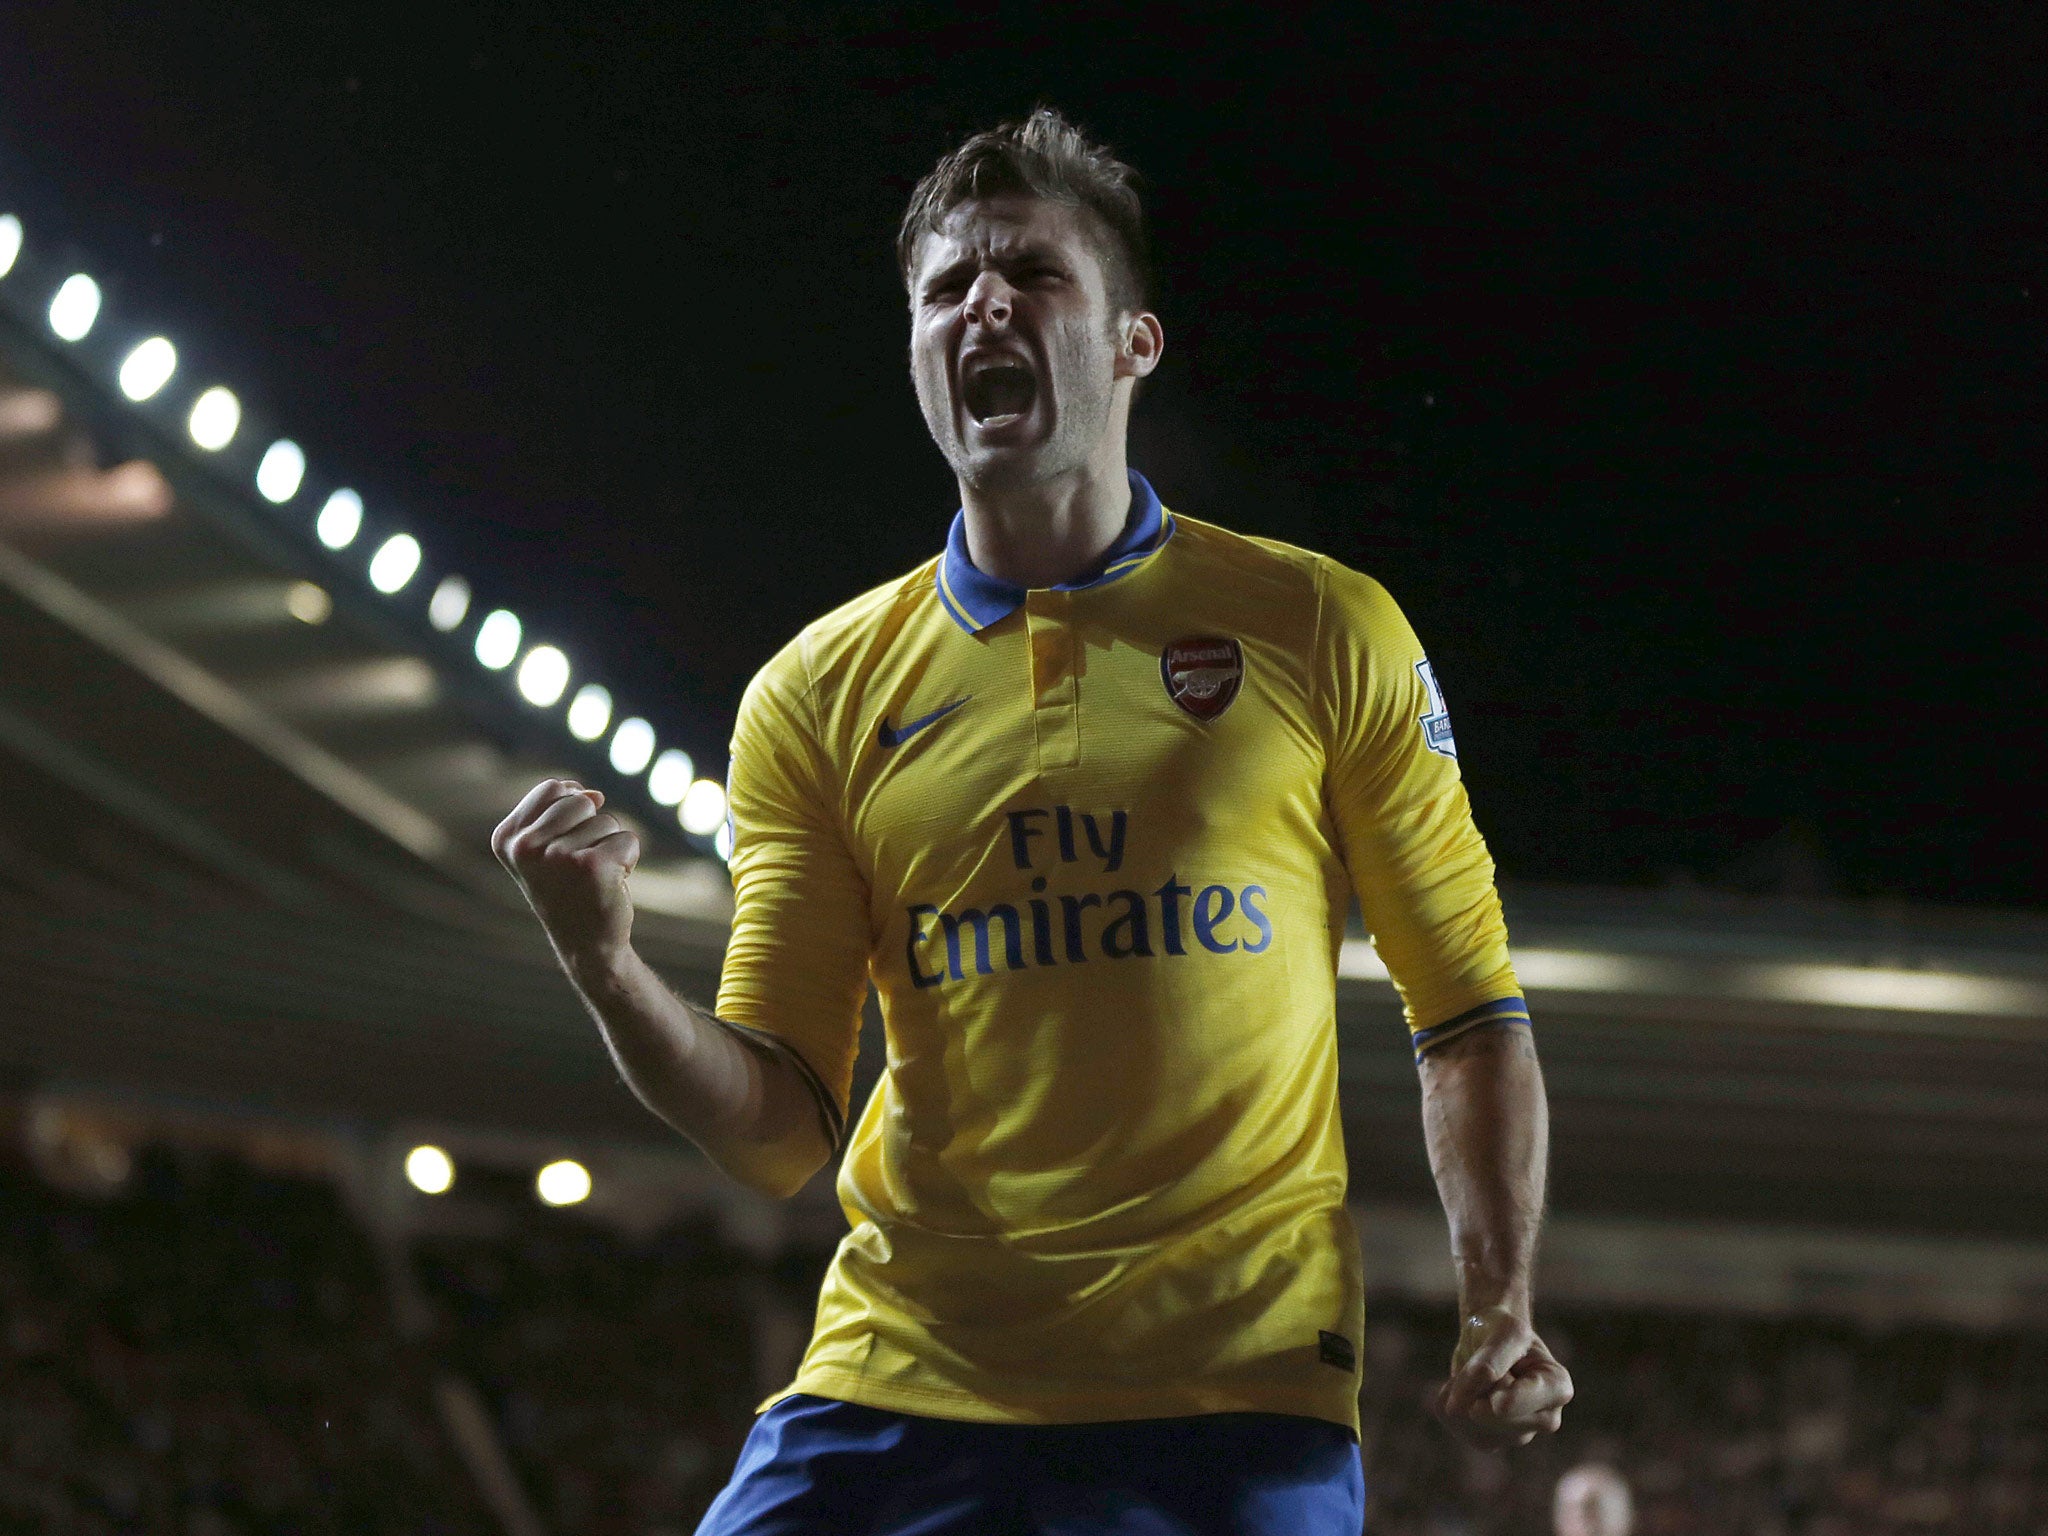 Arsenal's French striker Olivier Giroud is expected to play for the Gunners against Stoke